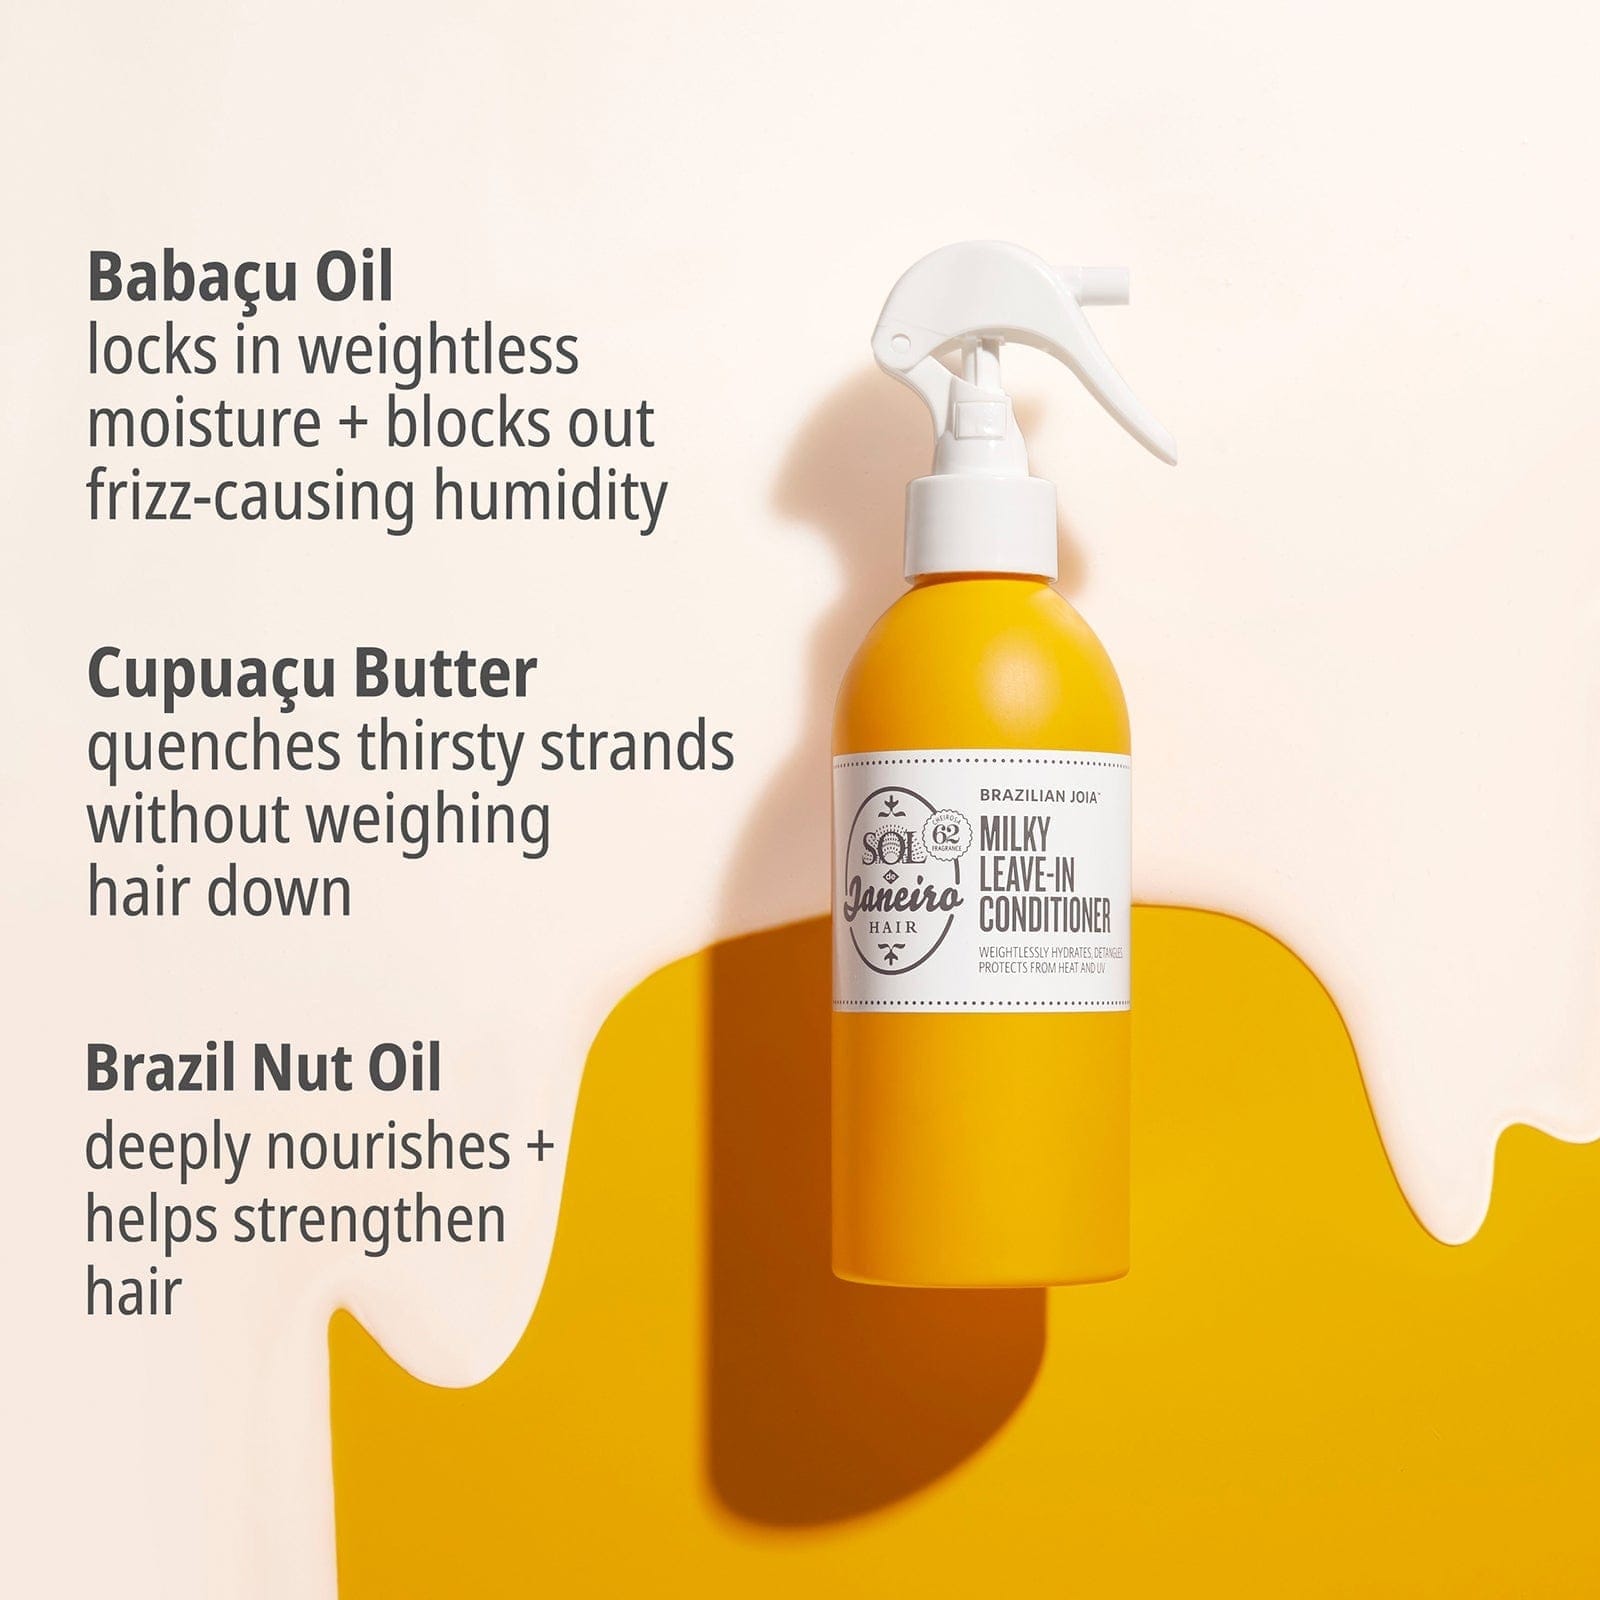 Babacu oil locks in weightless moisture + blocks out frizz-causing humidity, cupuacu butter quenches thirsty strands without weighing hair down, brazil nut oil deeply nourishes + helps strengthen hair